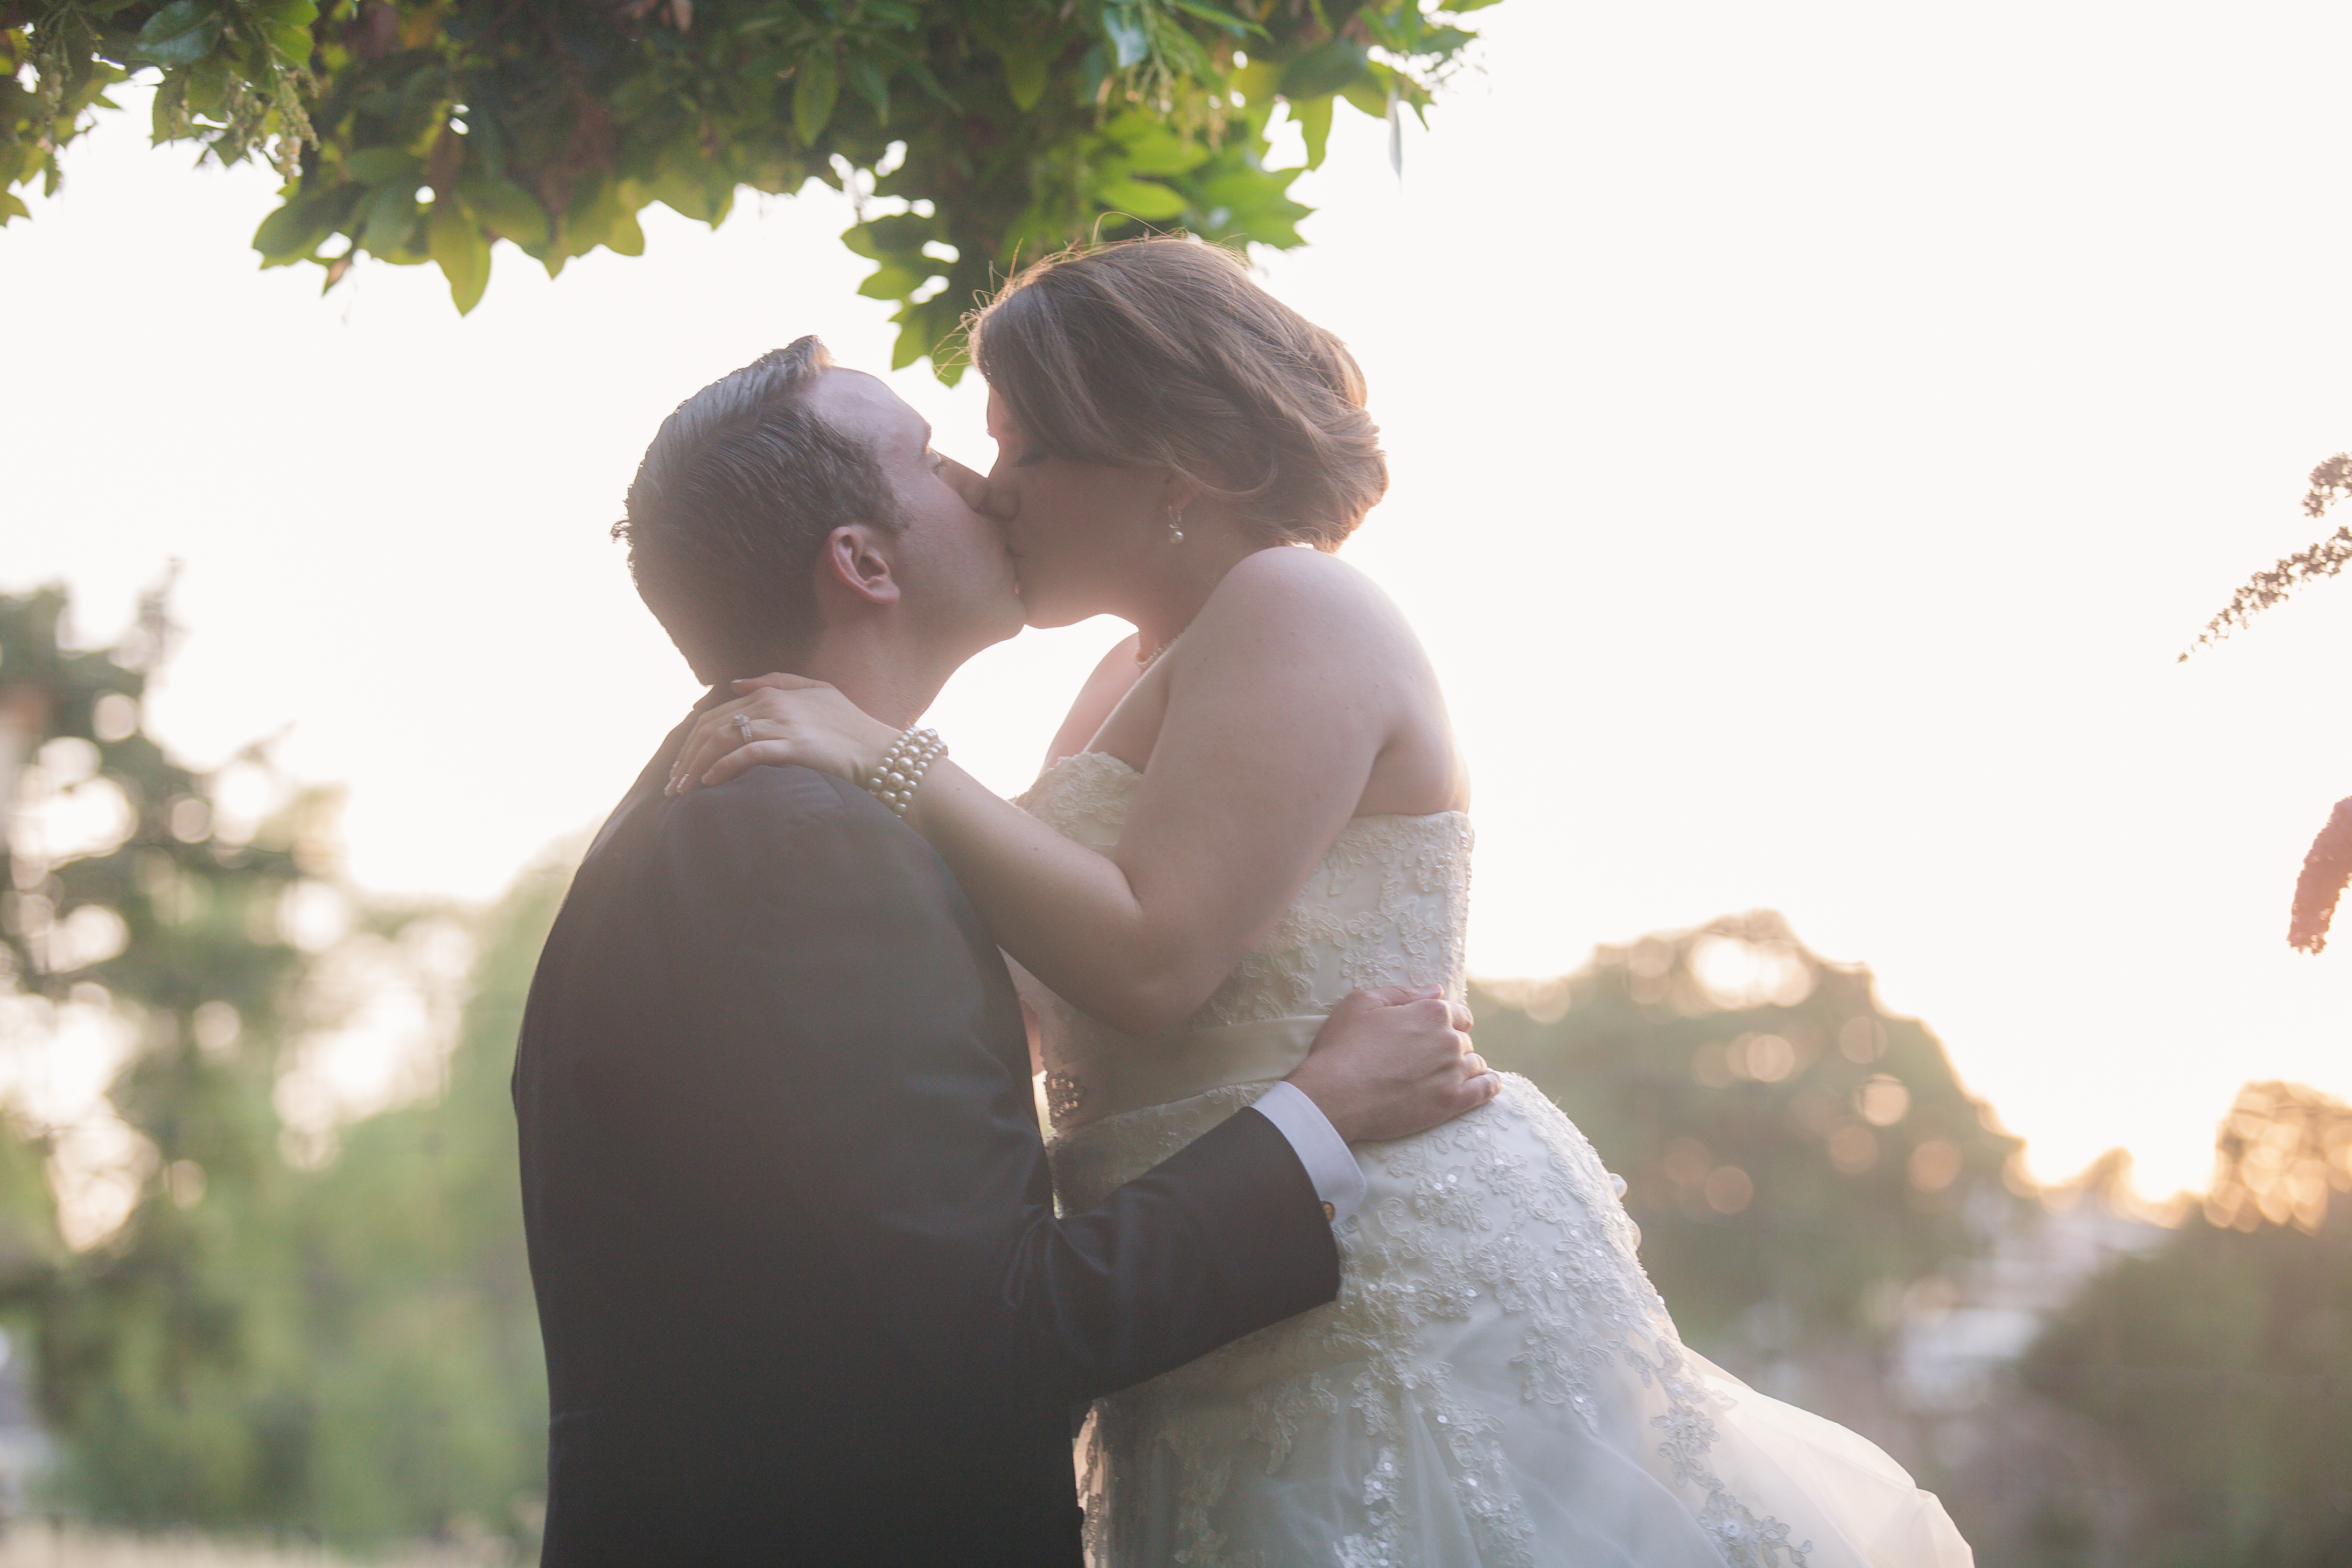 Love is in the air: Kayla and Chris Luttrell’s wedding in the east bay